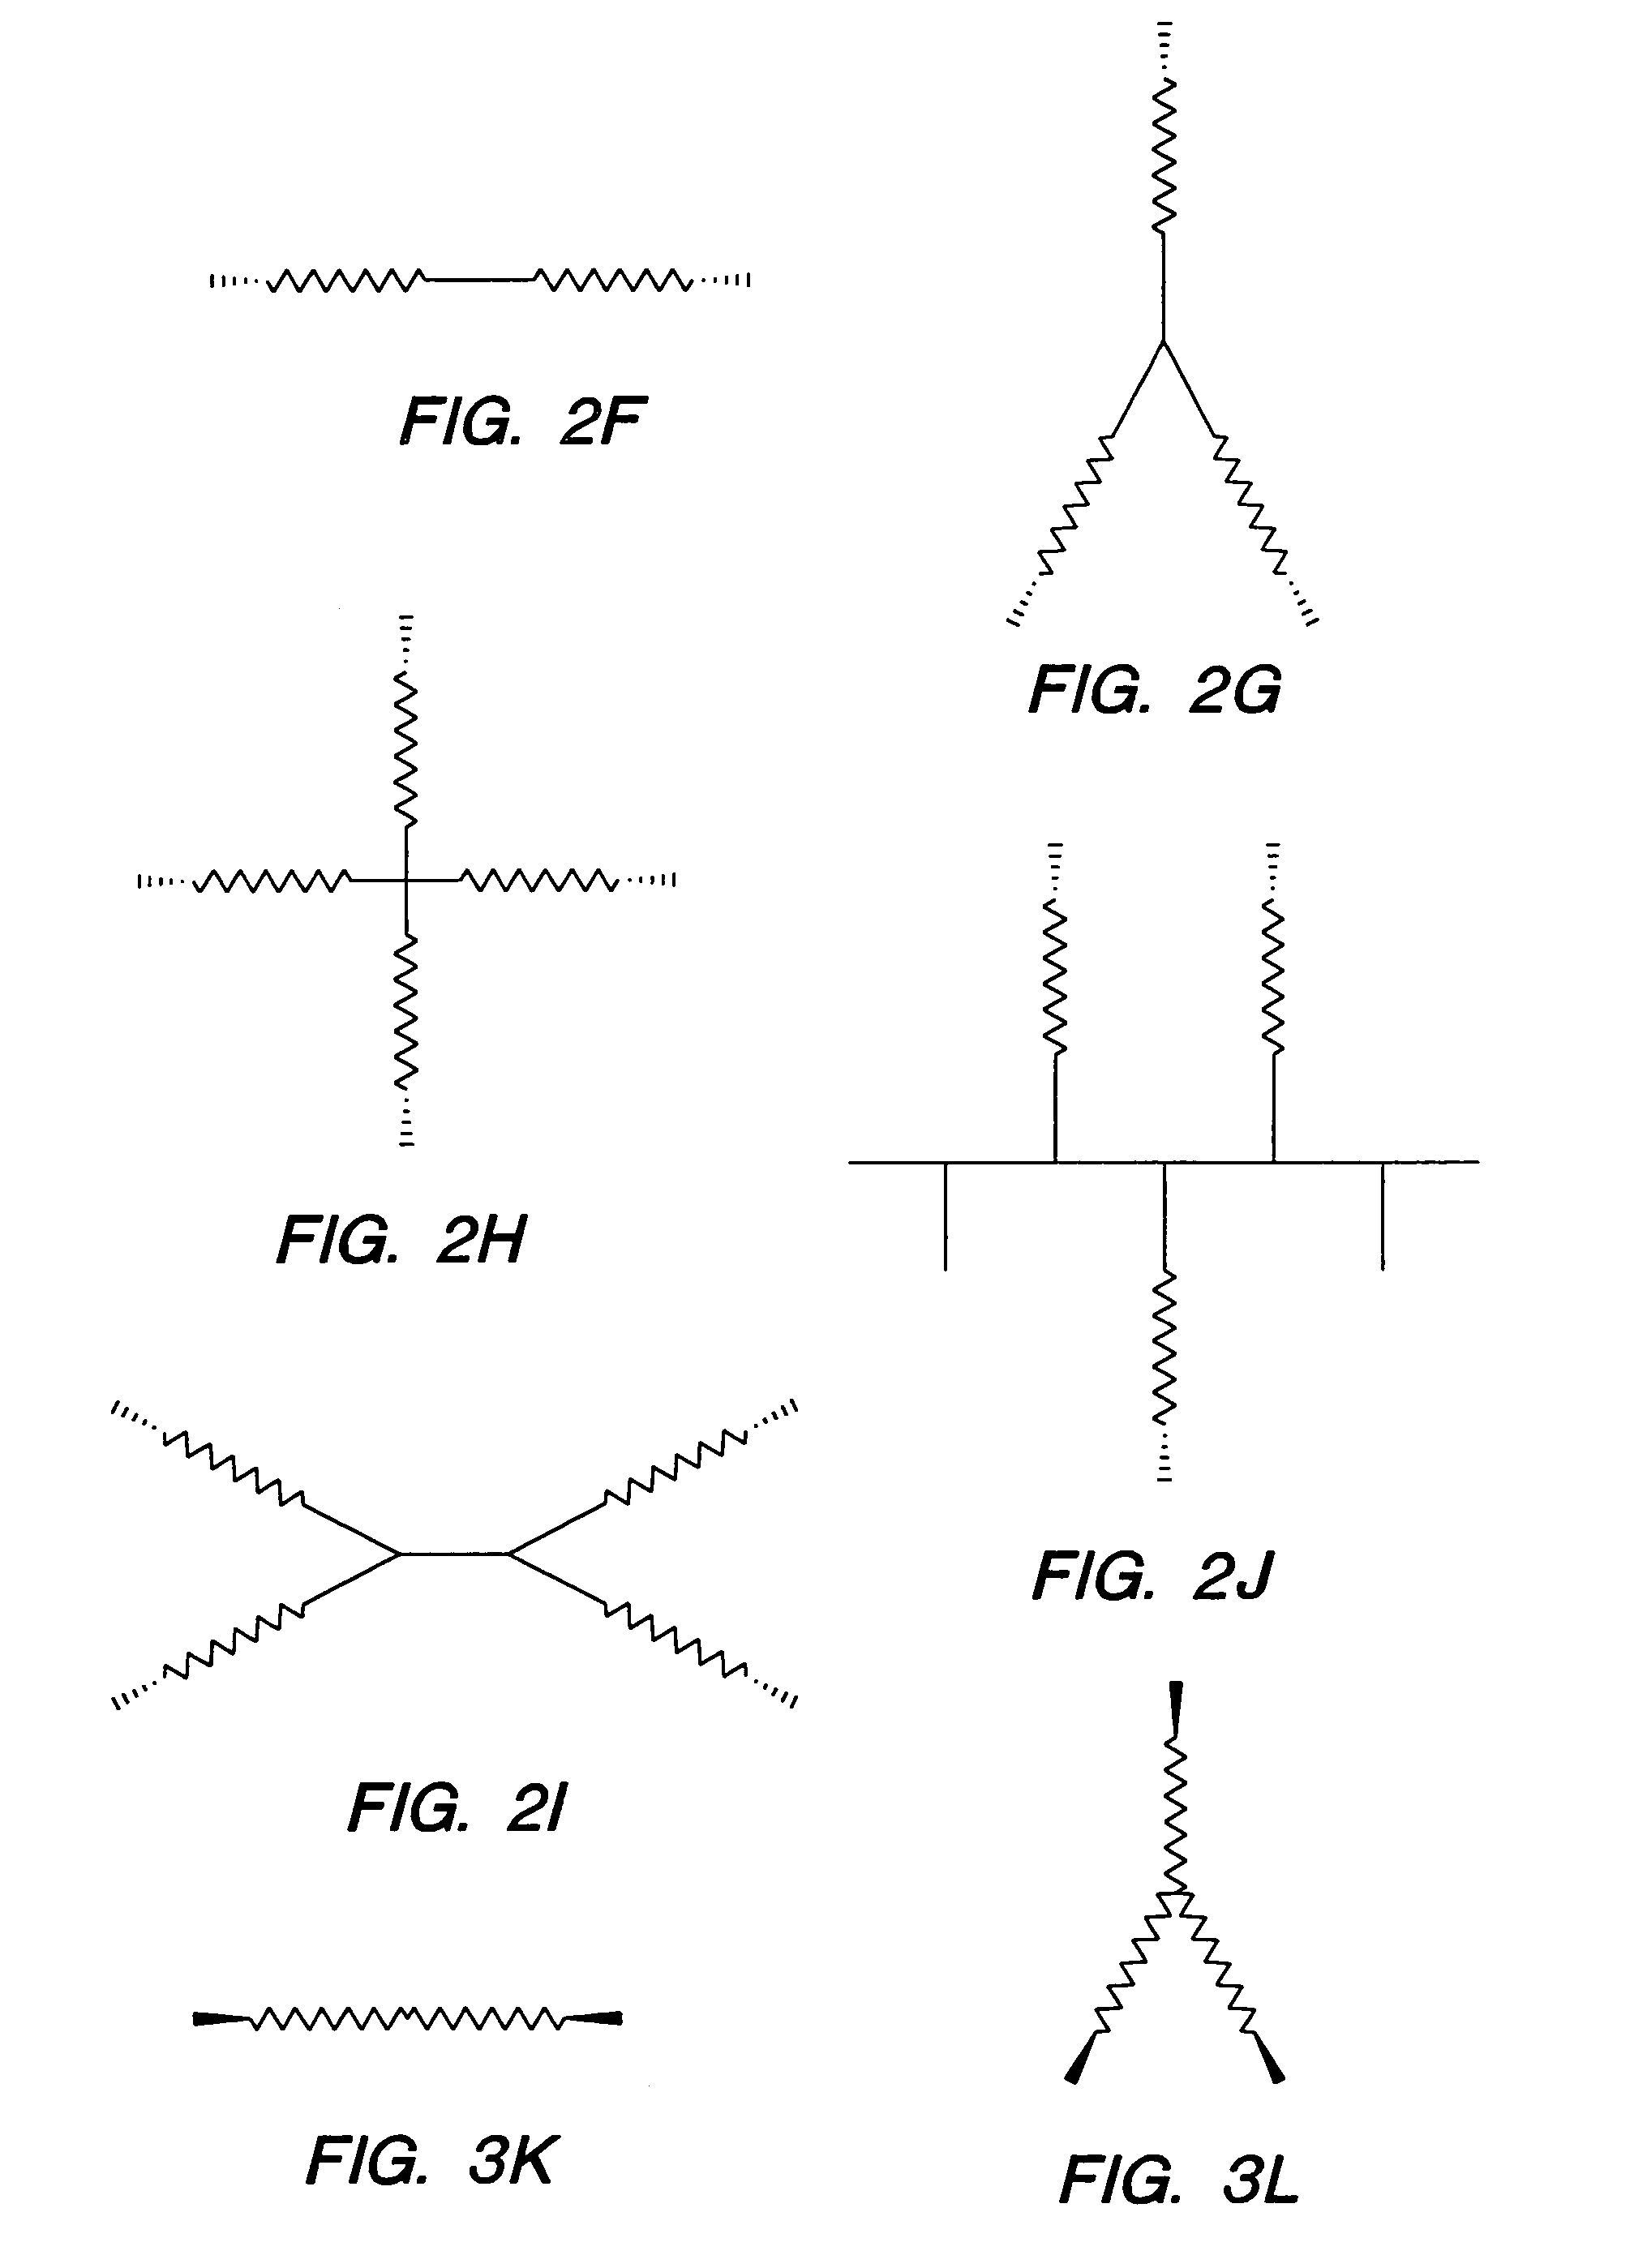 Biocompatible polymers and hydrogels and methods of use